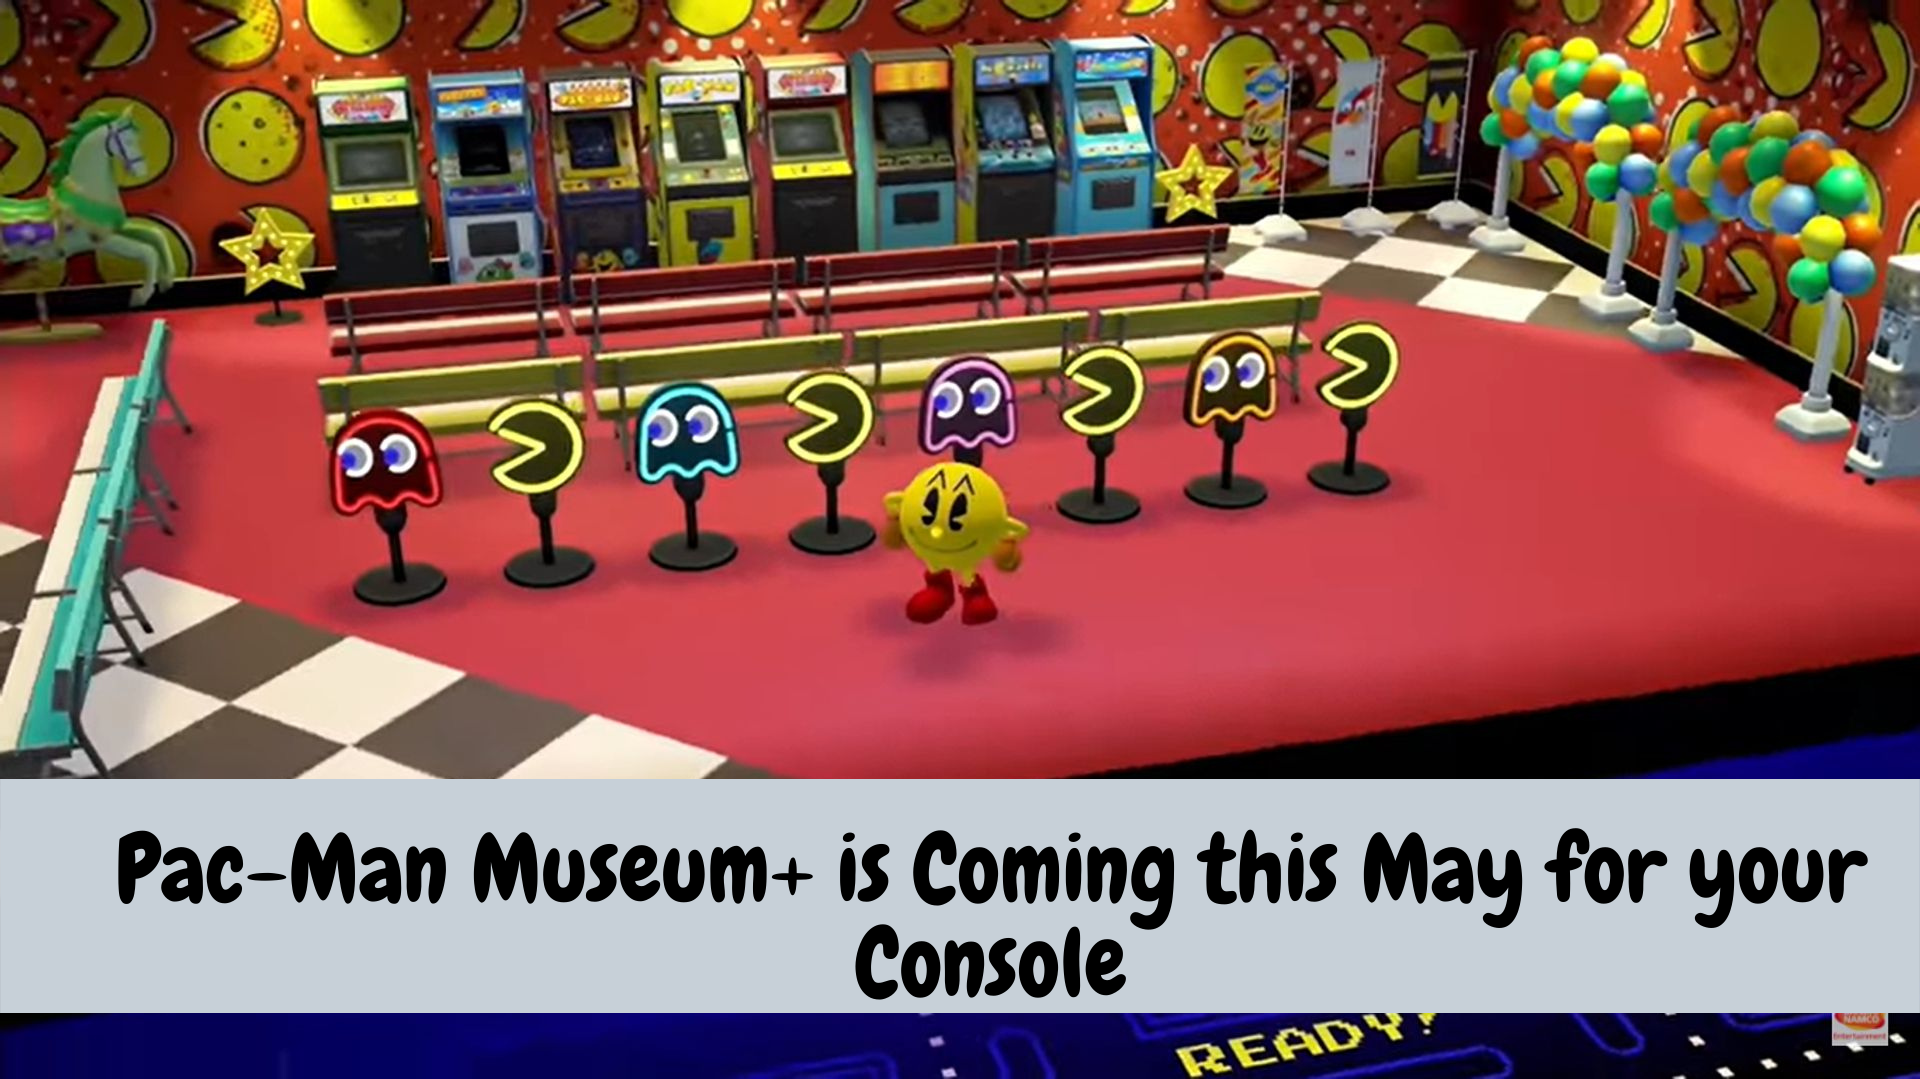 Pac-Man Museum+ is Coming this May for your Console